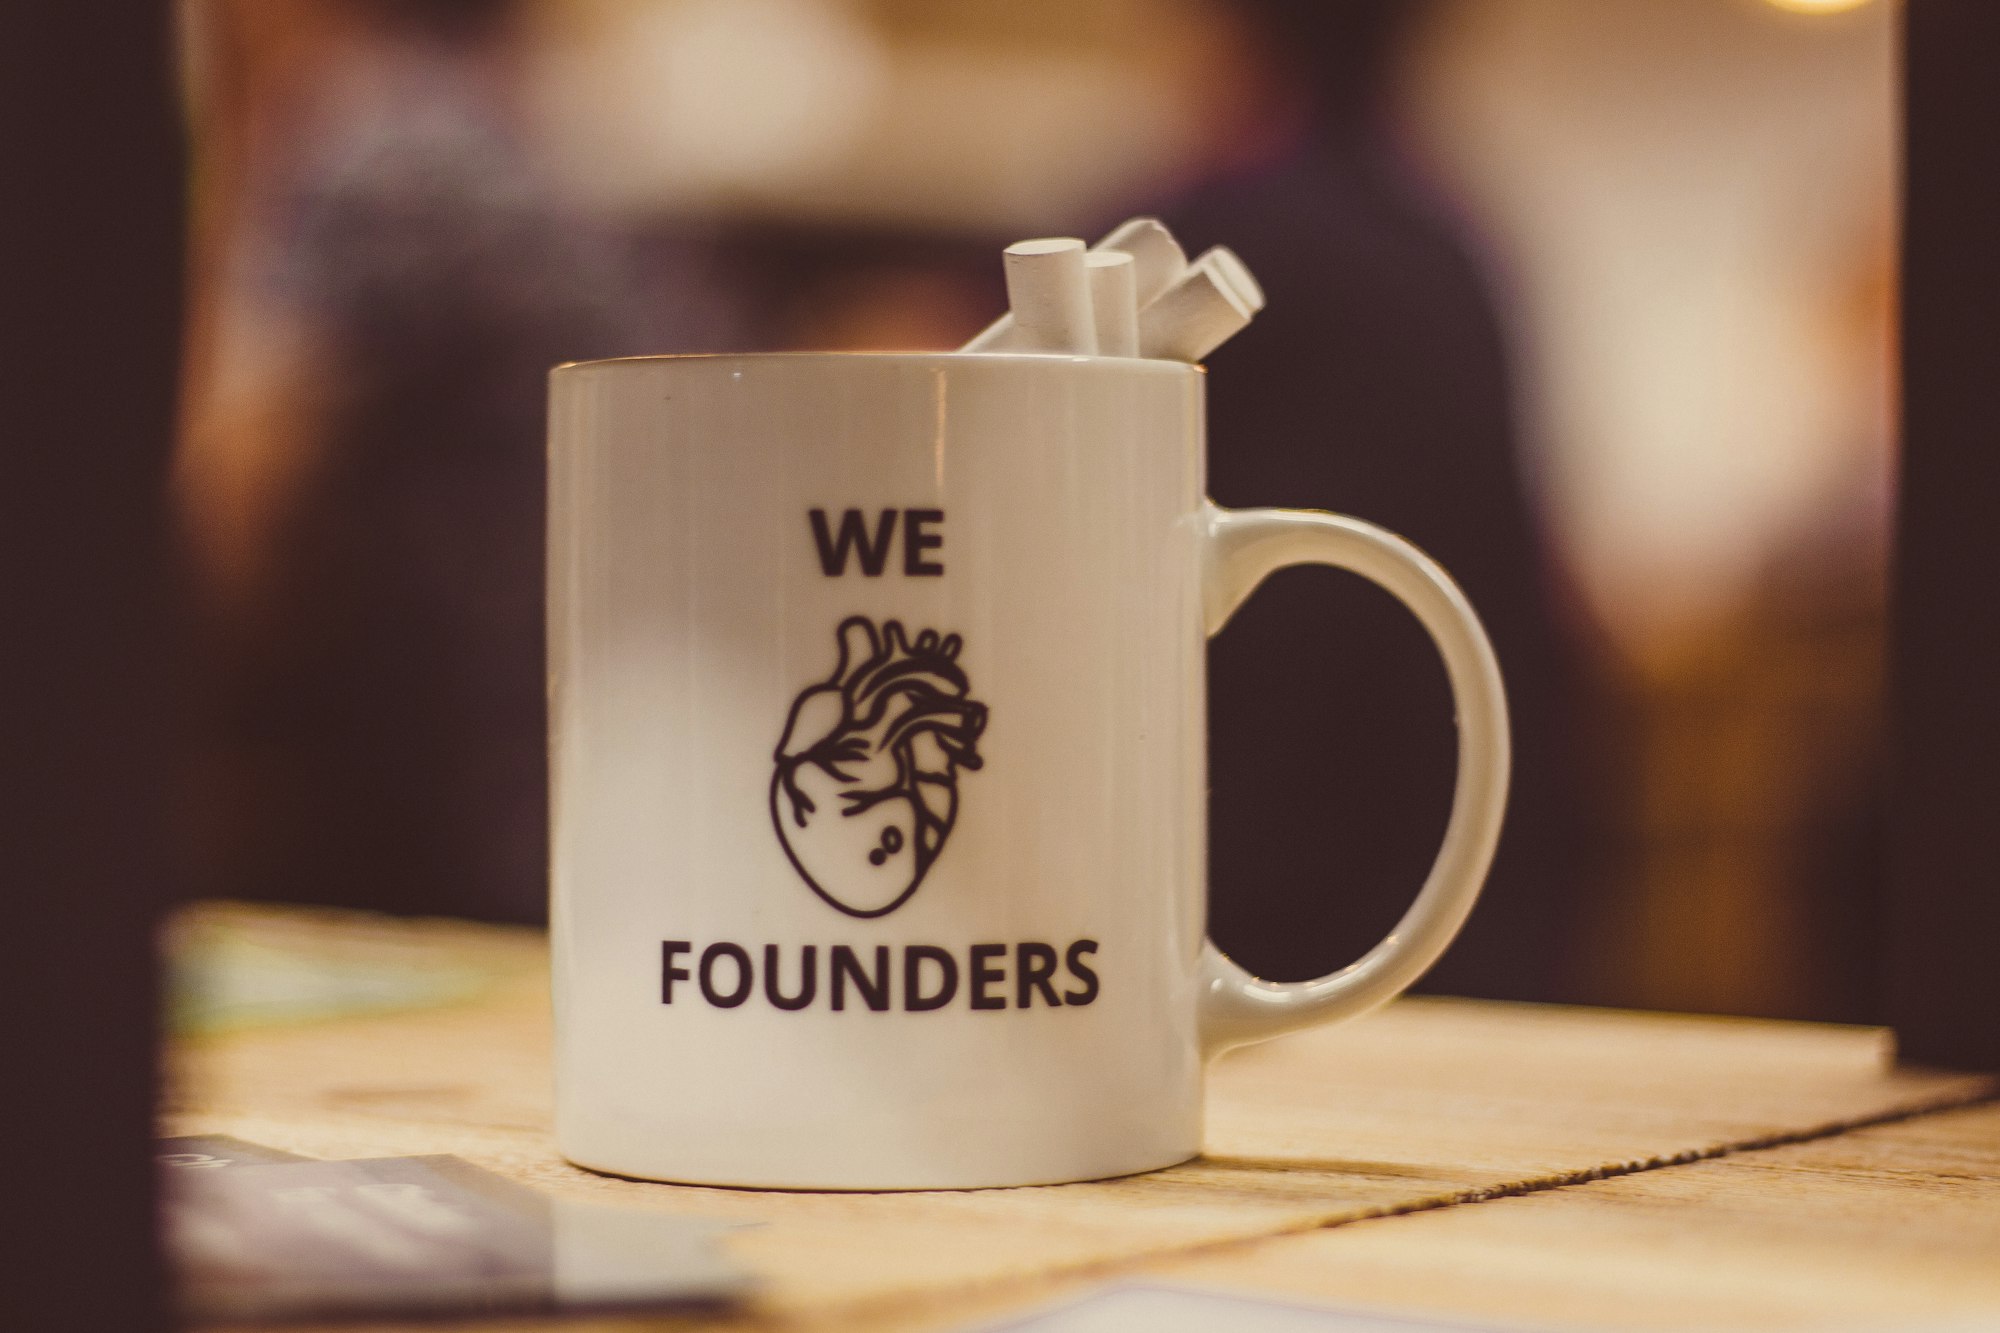 Common problems non-technical founders typically run into